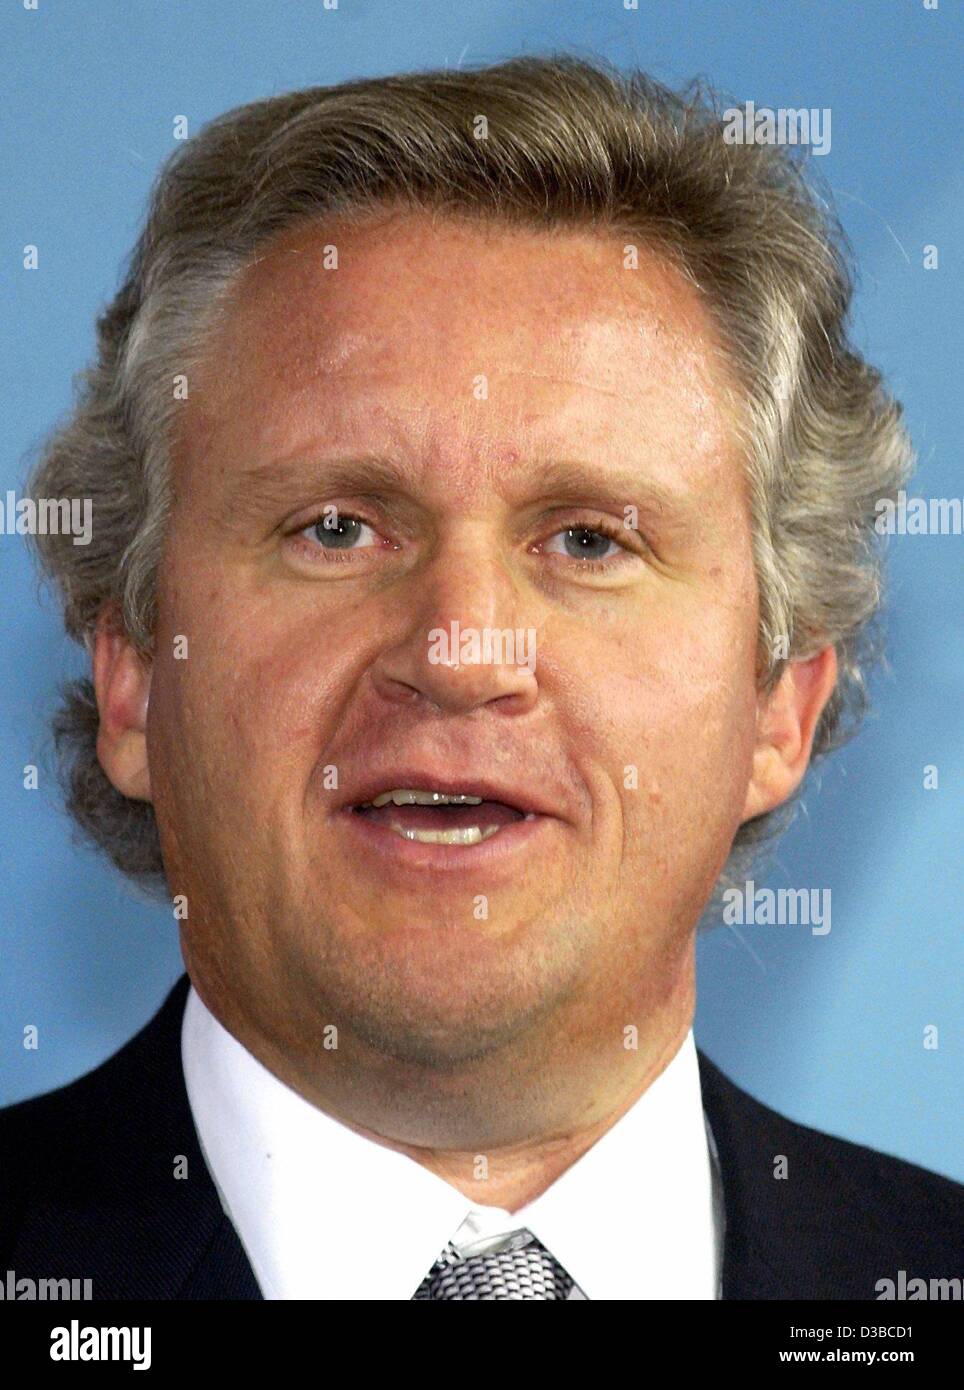 (dpa) - Jeffrey R. Immelt, Chairman of the Board of US company General Electric, pirctured in Berlin, 23 October 2002. Stock Photo